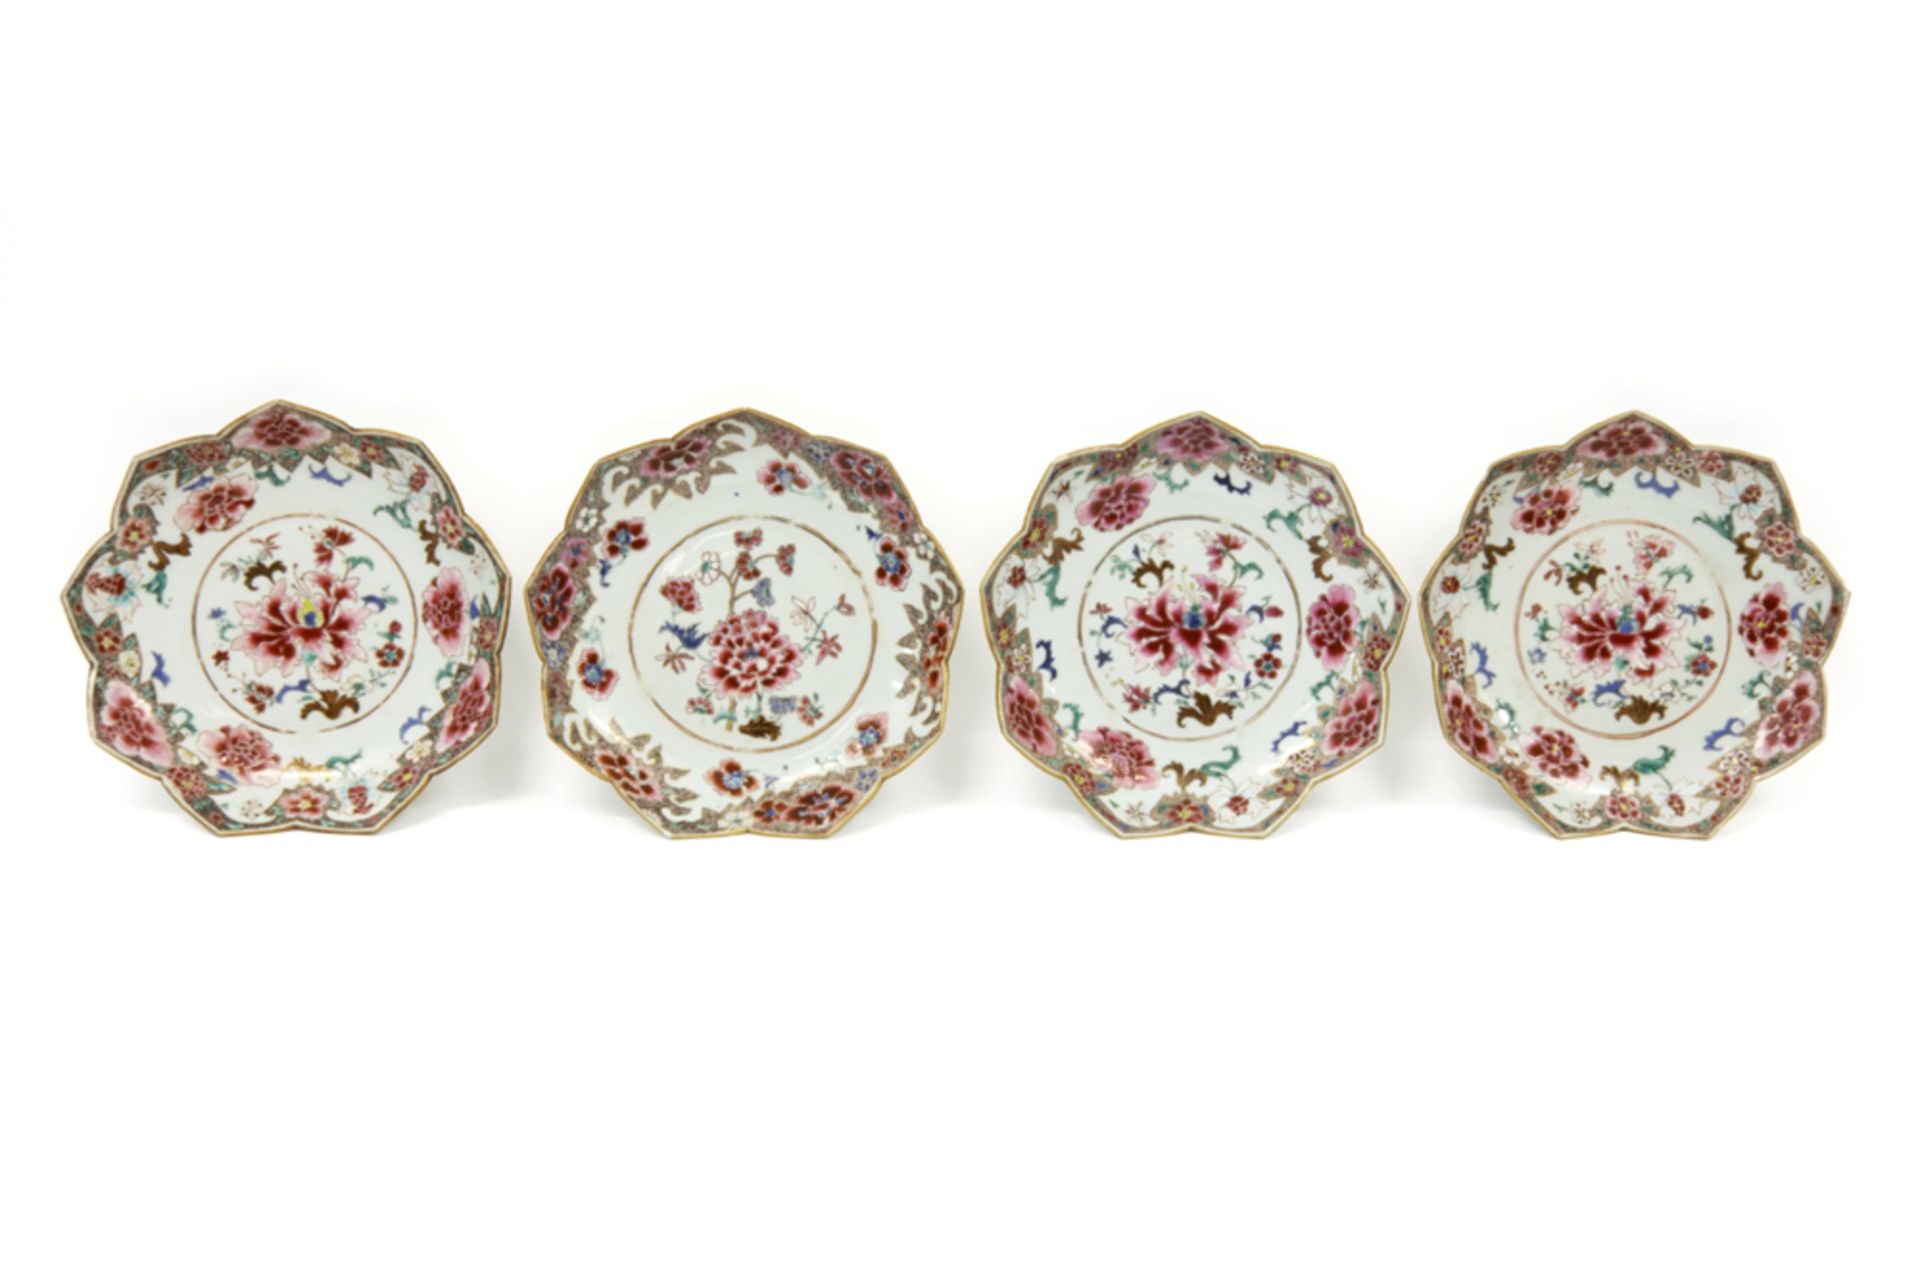 series of four 18th Cent. plates in Chinese porcelain with a 'Famille Rose' flower decor || Serie